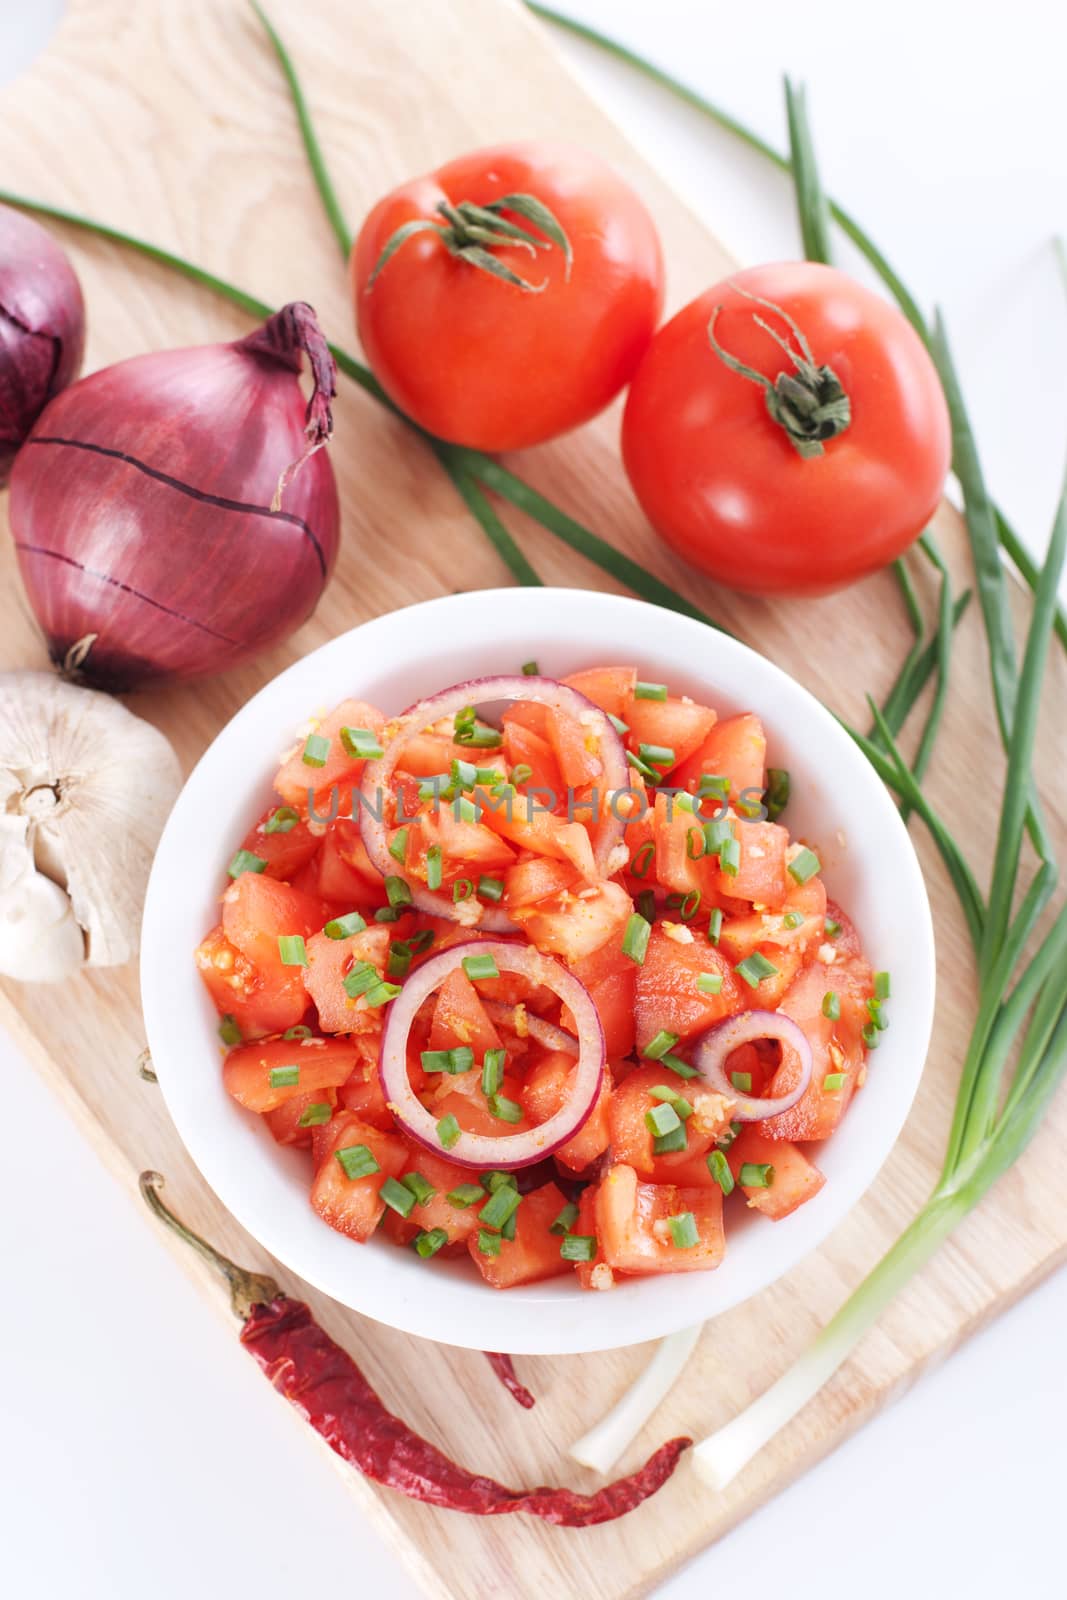 Salsa in a bowl on a wooden board and the ingredients: tomatoes, onions, garlic, chili pepper